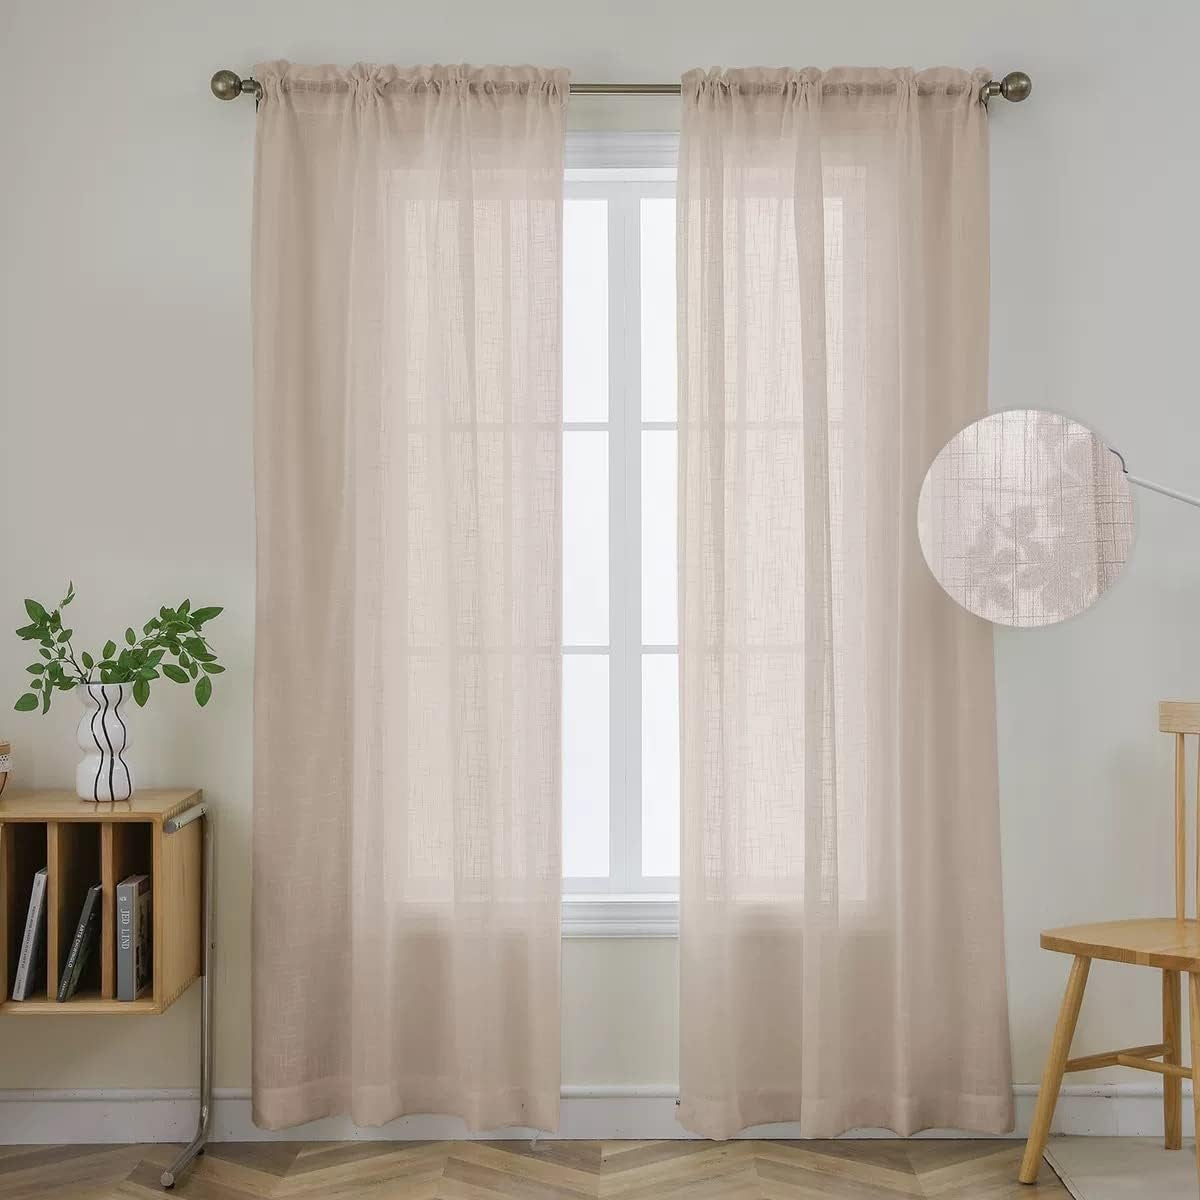 Joydeco White Sheer Curtains 63 Inch Length 2 Panels Set, Rod Pocket Long Sheer Curtains for Window Bedroom Living Room, Lightweight Semi Drape Panels for Yard Patio (54X63 Inch, off White)  Joydeco Floral Embroidery-Linen 54W X 84L Inch X 2 Panels 